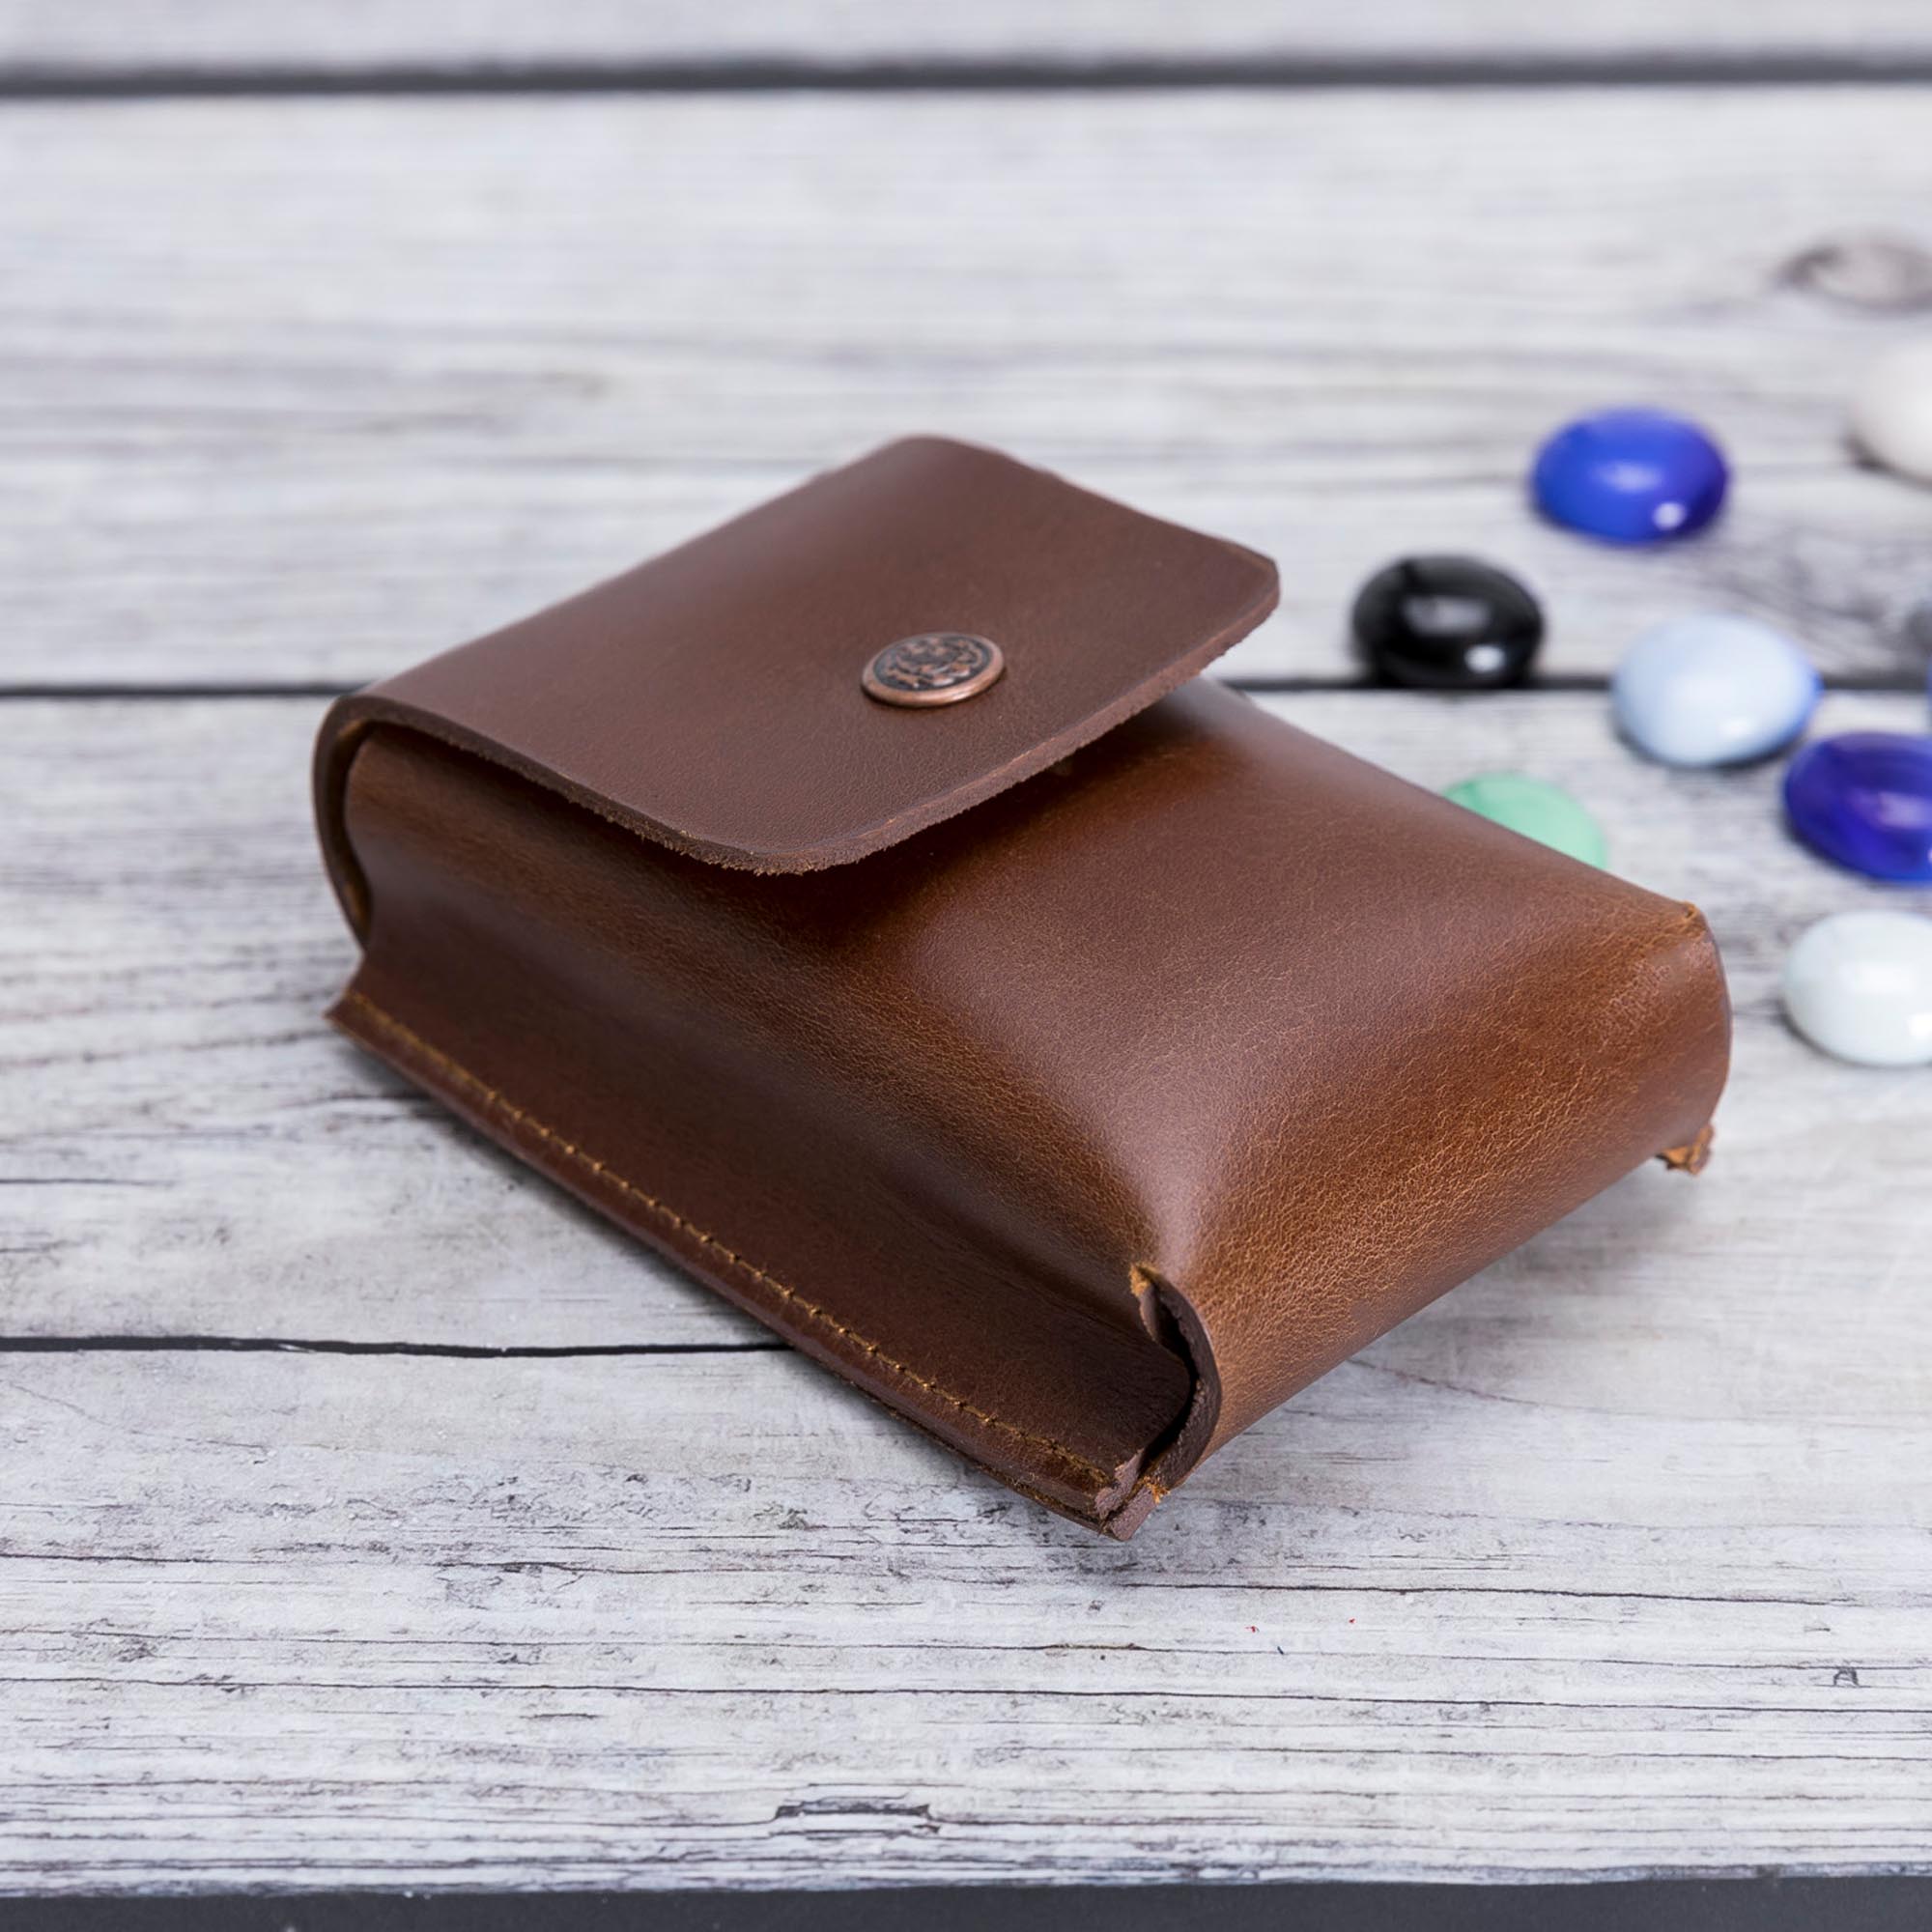 Troy Leather Case for Cigarette - BROWN - saracleather